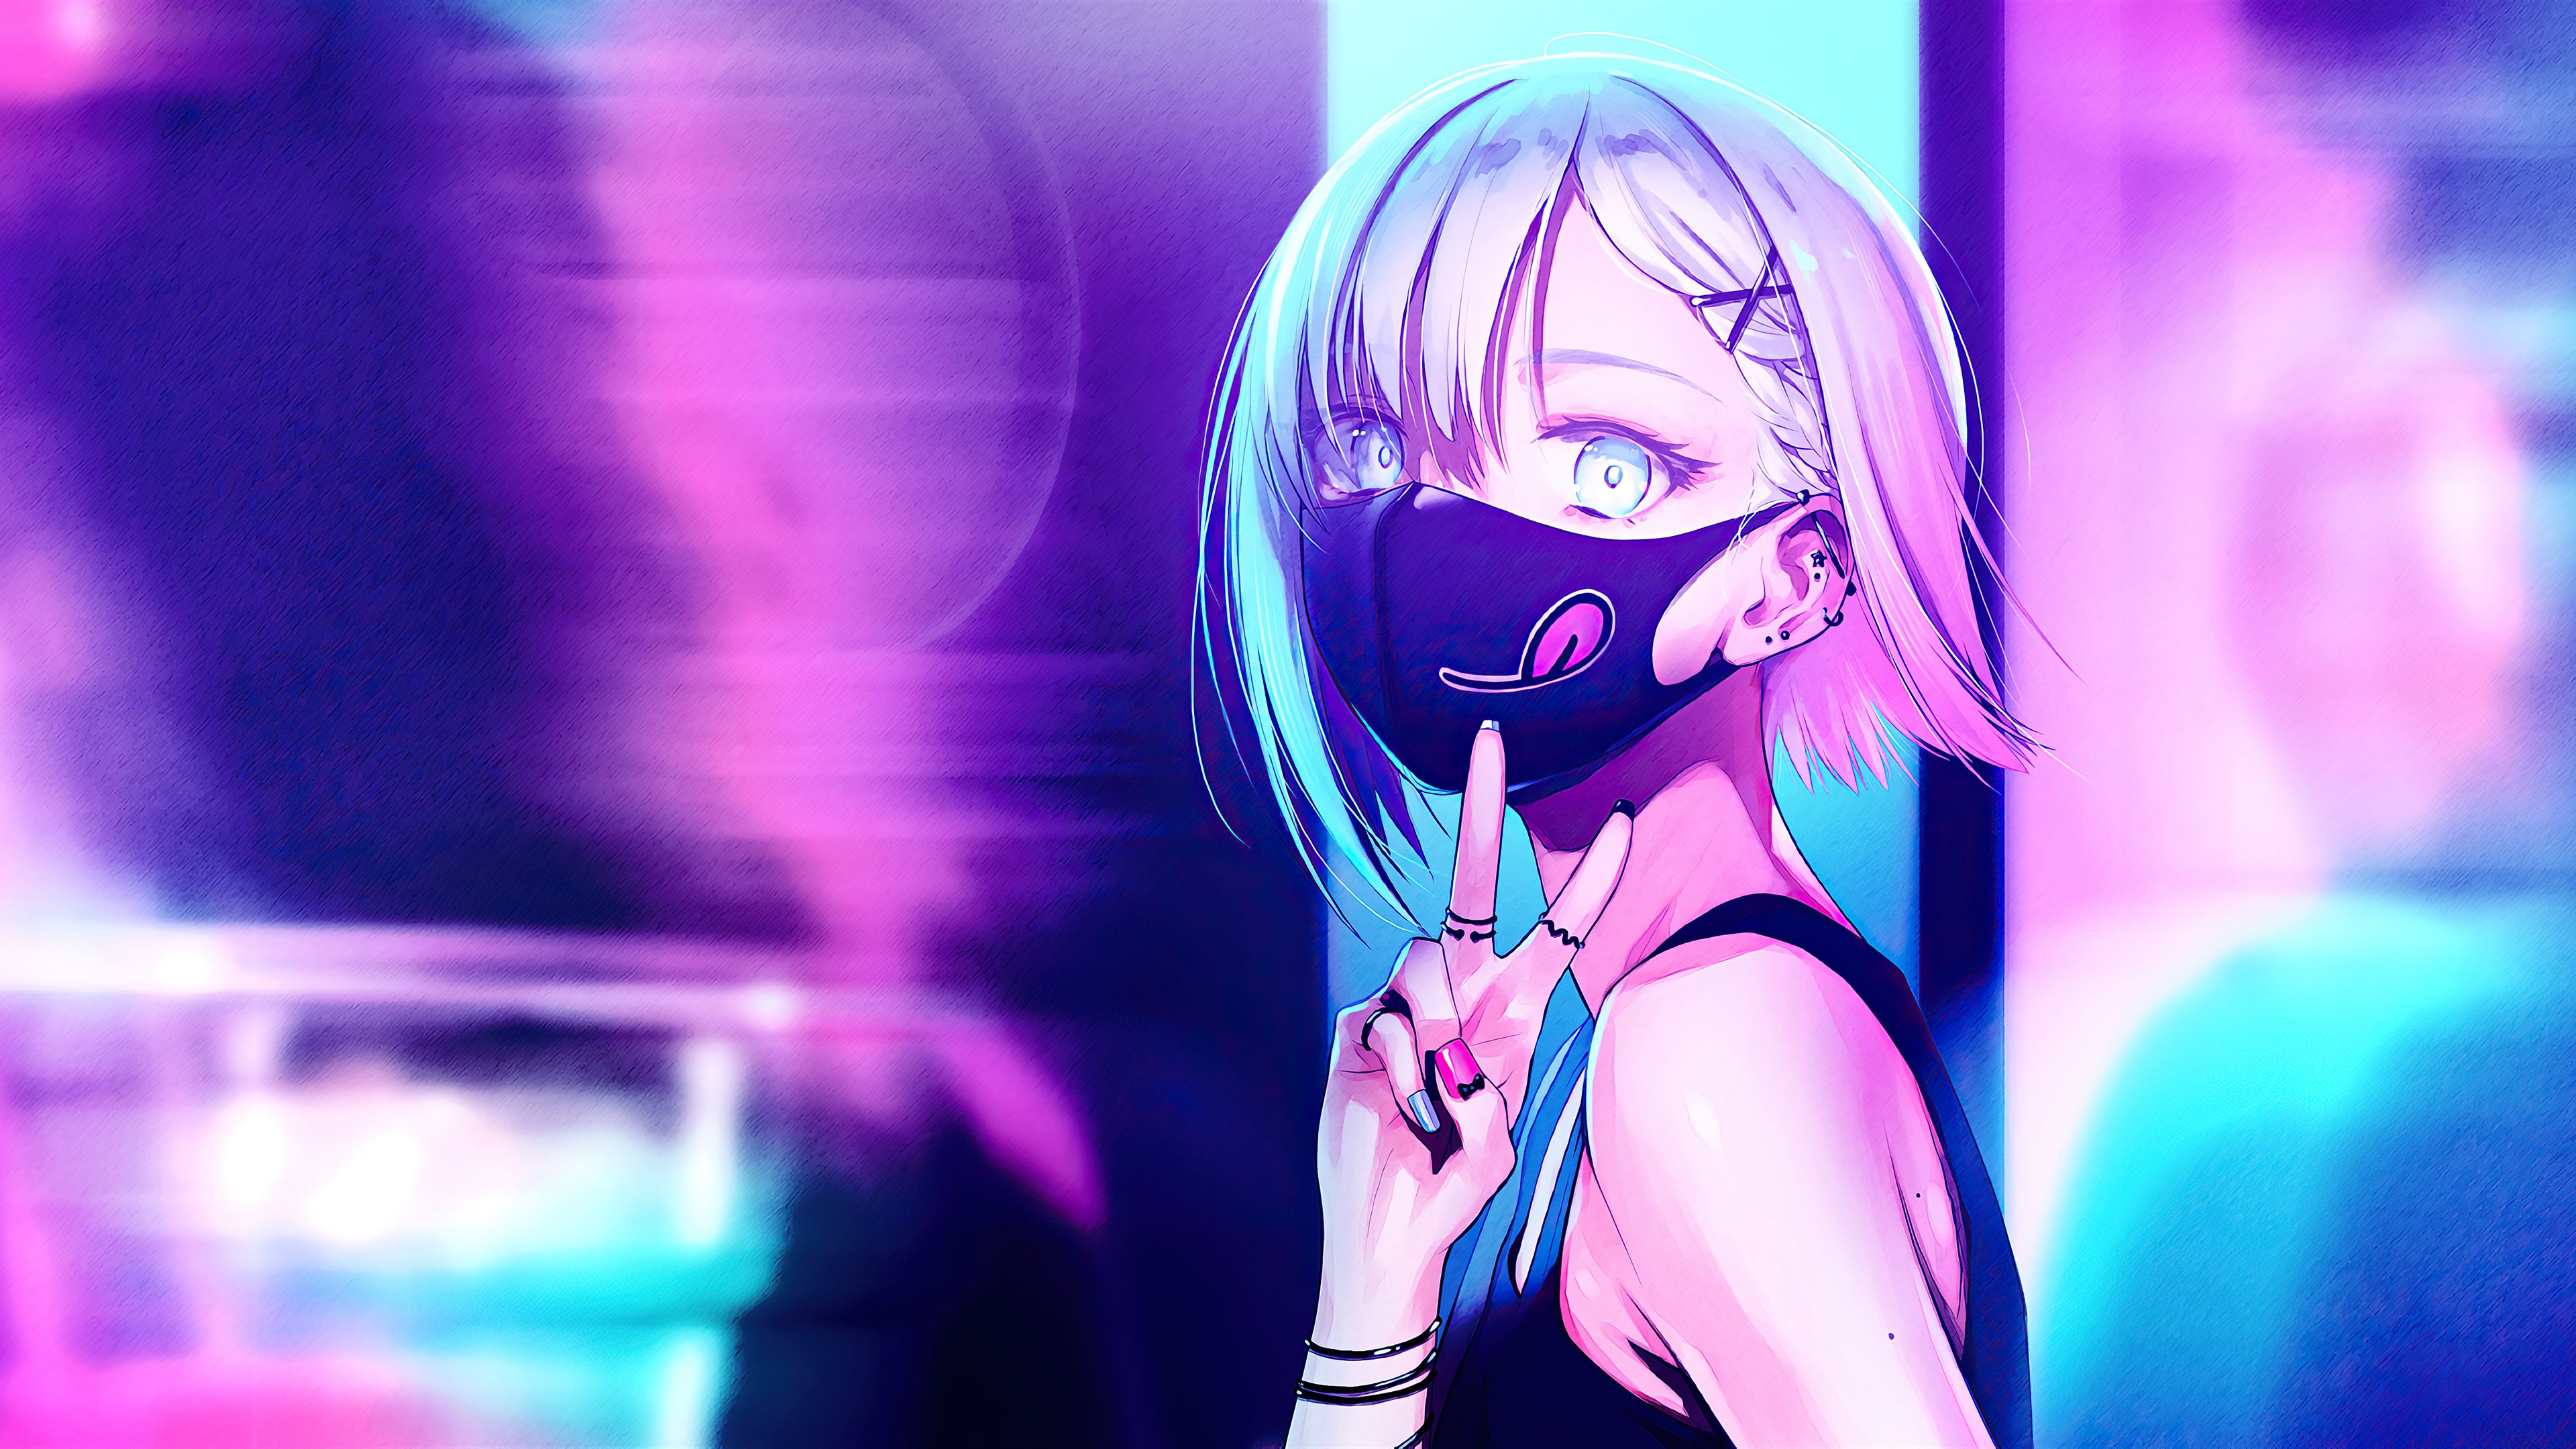 Anime Pink Neon Wallpapers - Wallpaper Cave.